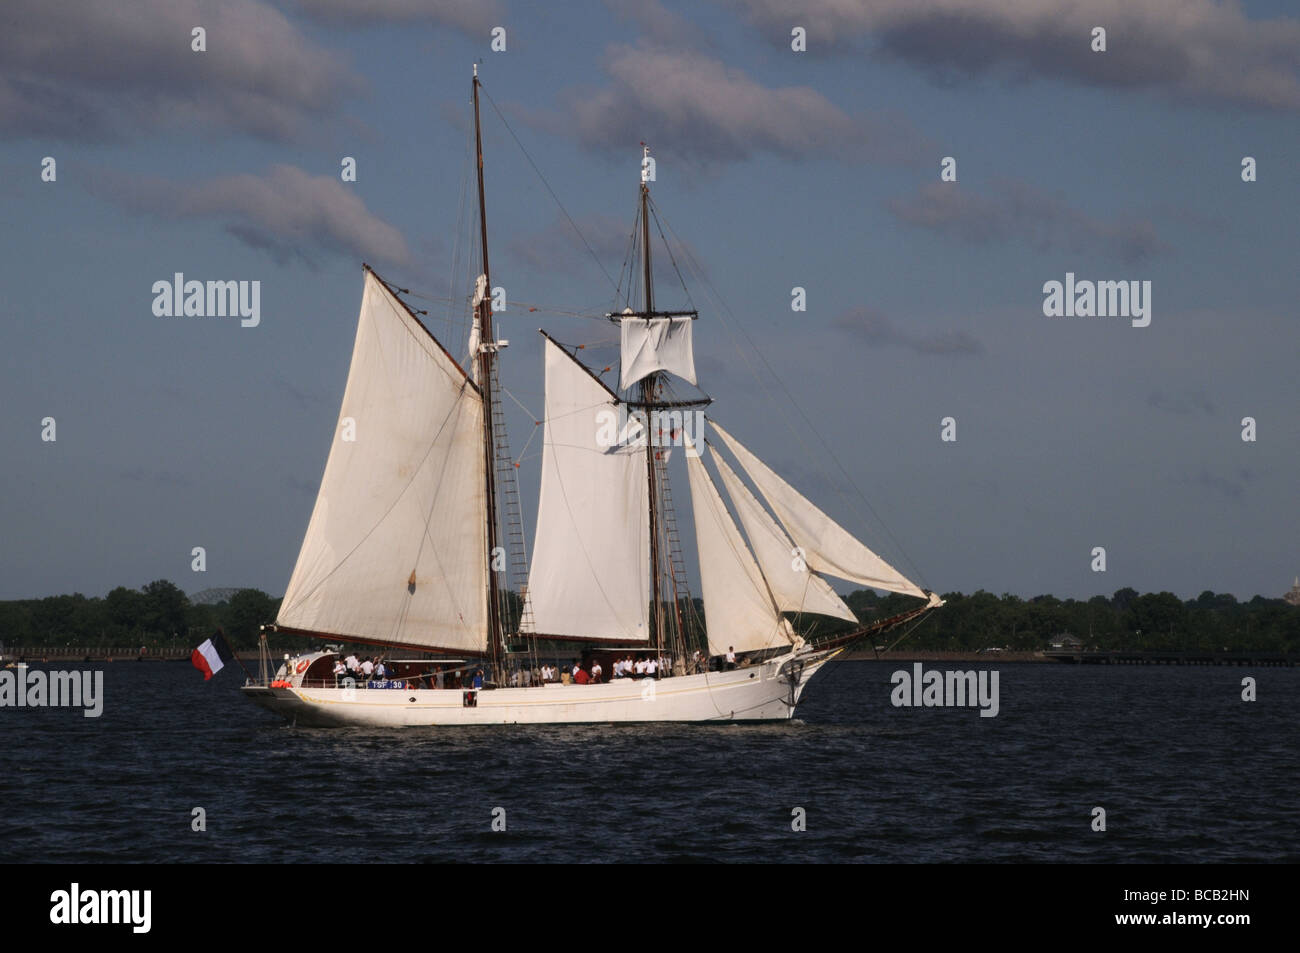 Gaff-rigged sailboat on the Hudson River near Lower Manhattan. Stock Photo